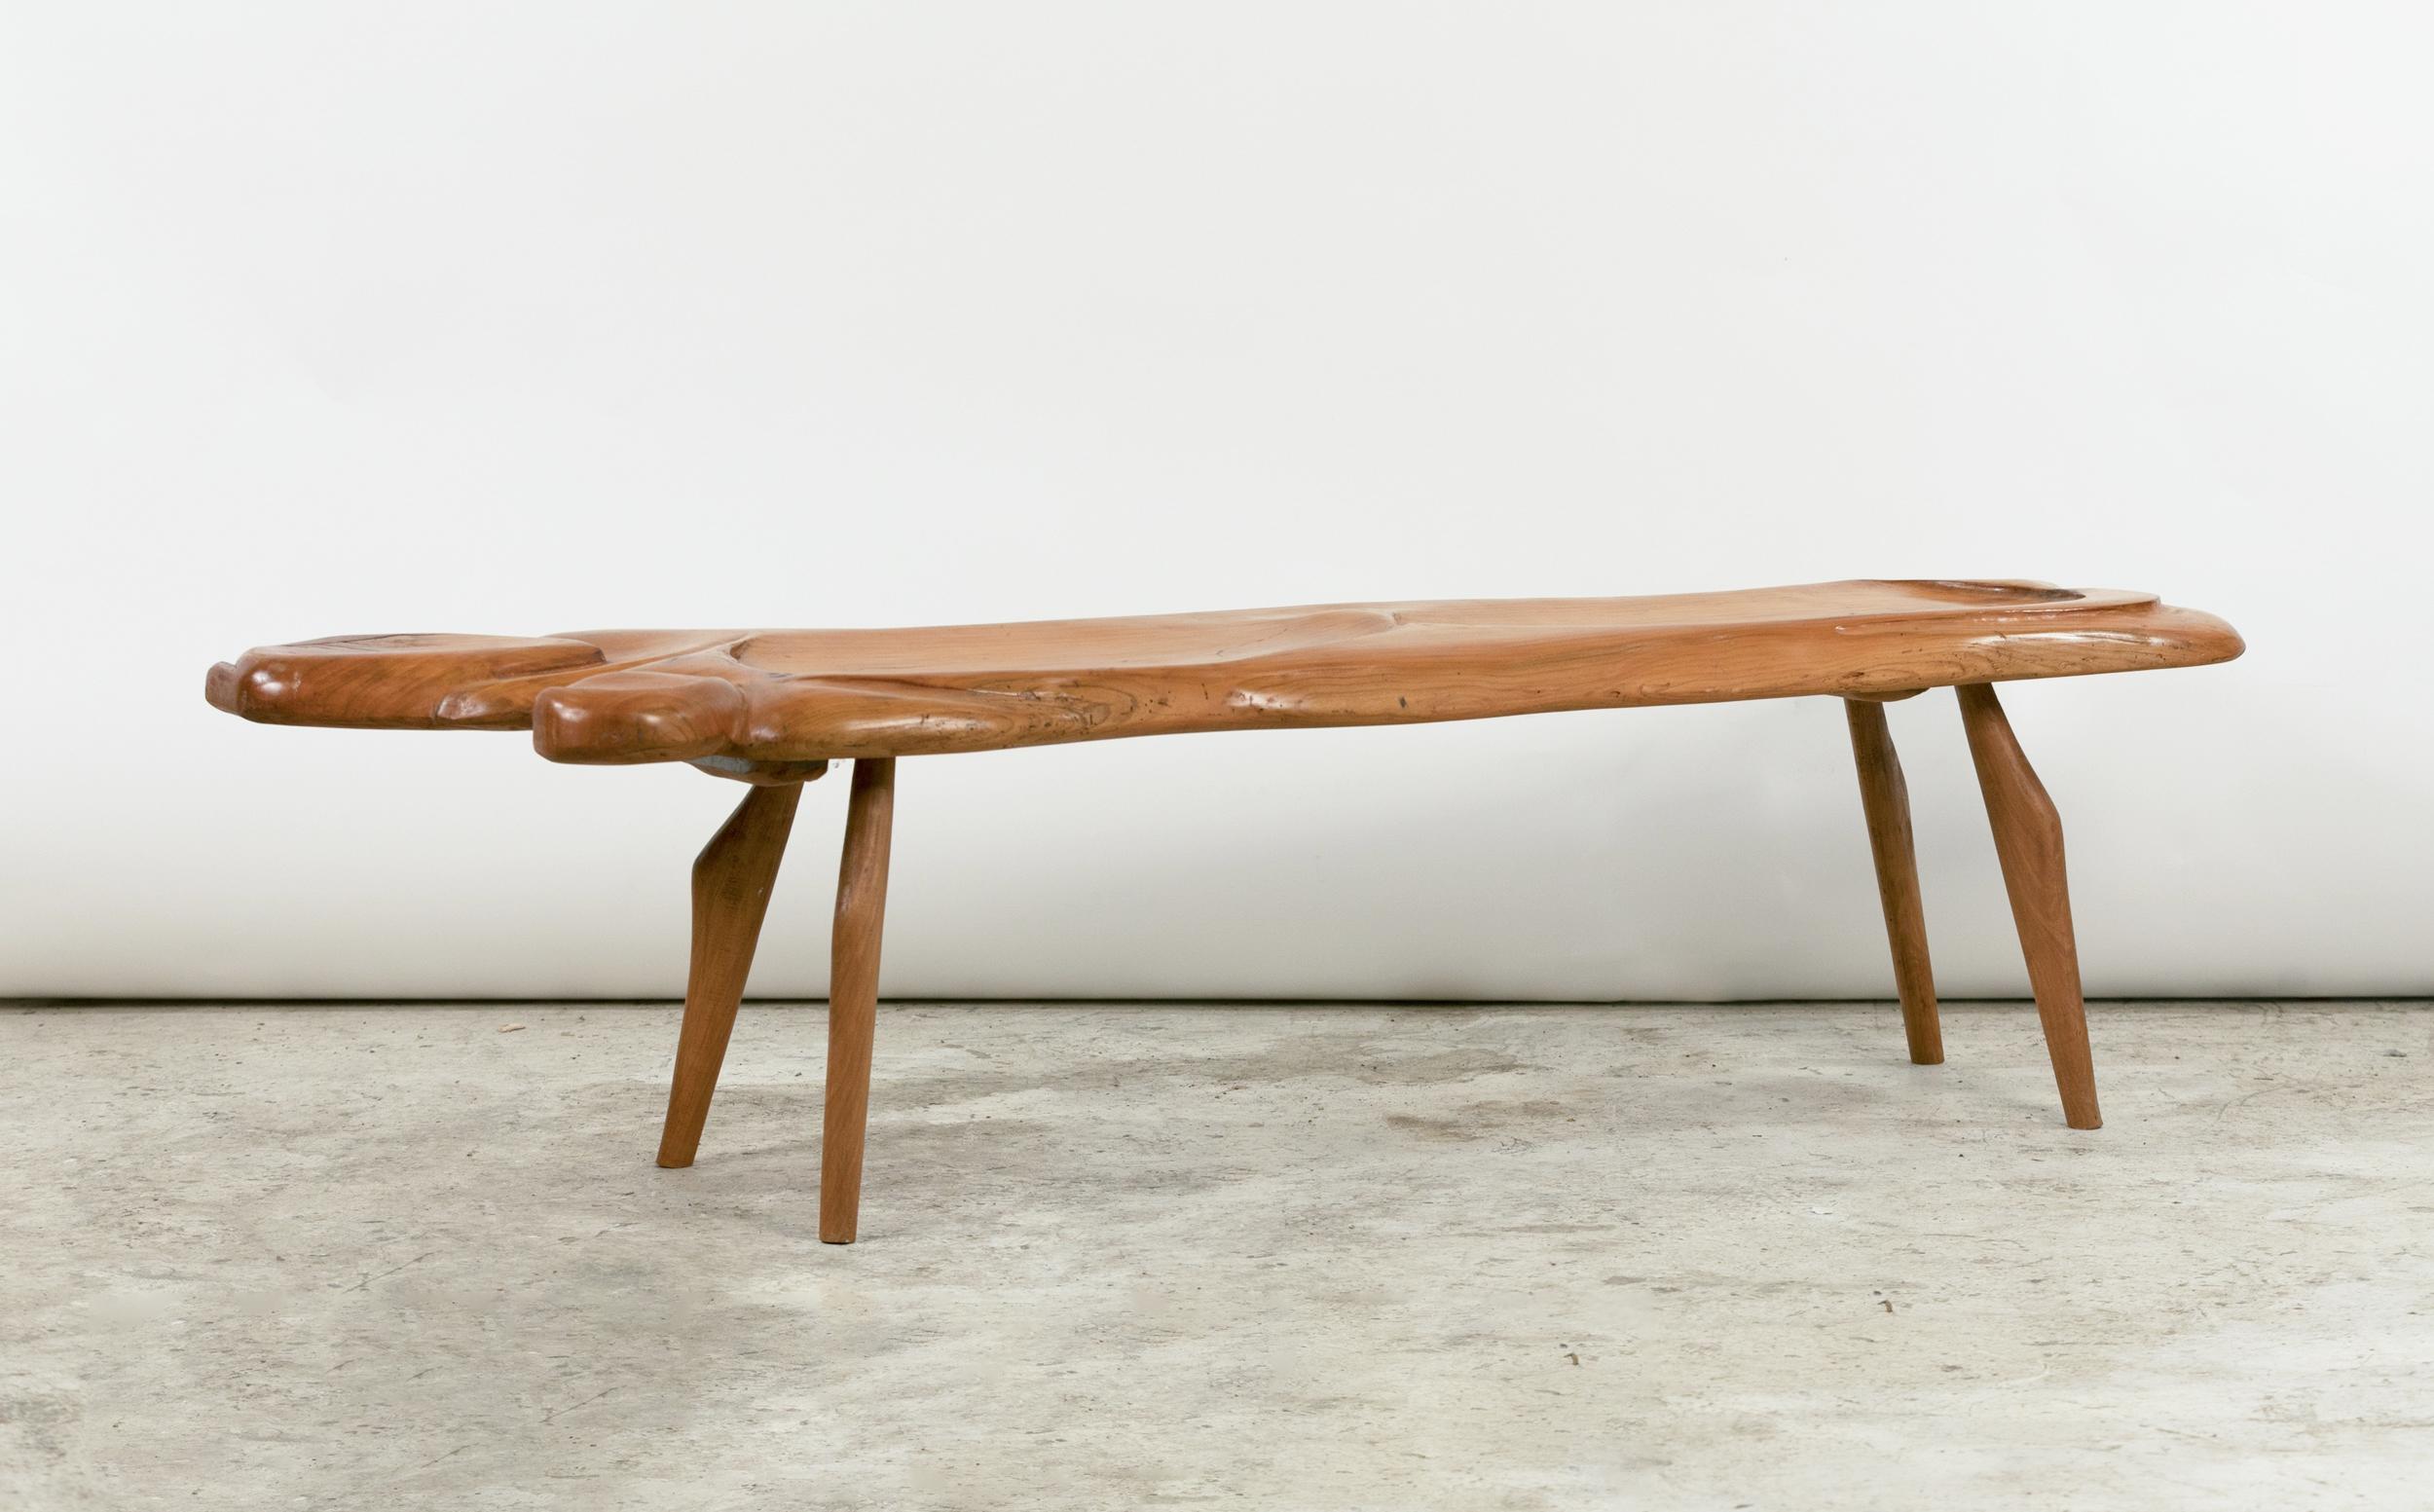 

A very pretty Brutalist-style bench or coffee table in carved elm.
Lenght: 165 cm (65 in /5.42 ft)
Width: 49 cm (19.2 in)
Width in the middle: 38 cm (15 in)
Height: 45 cm (17.7 in)
